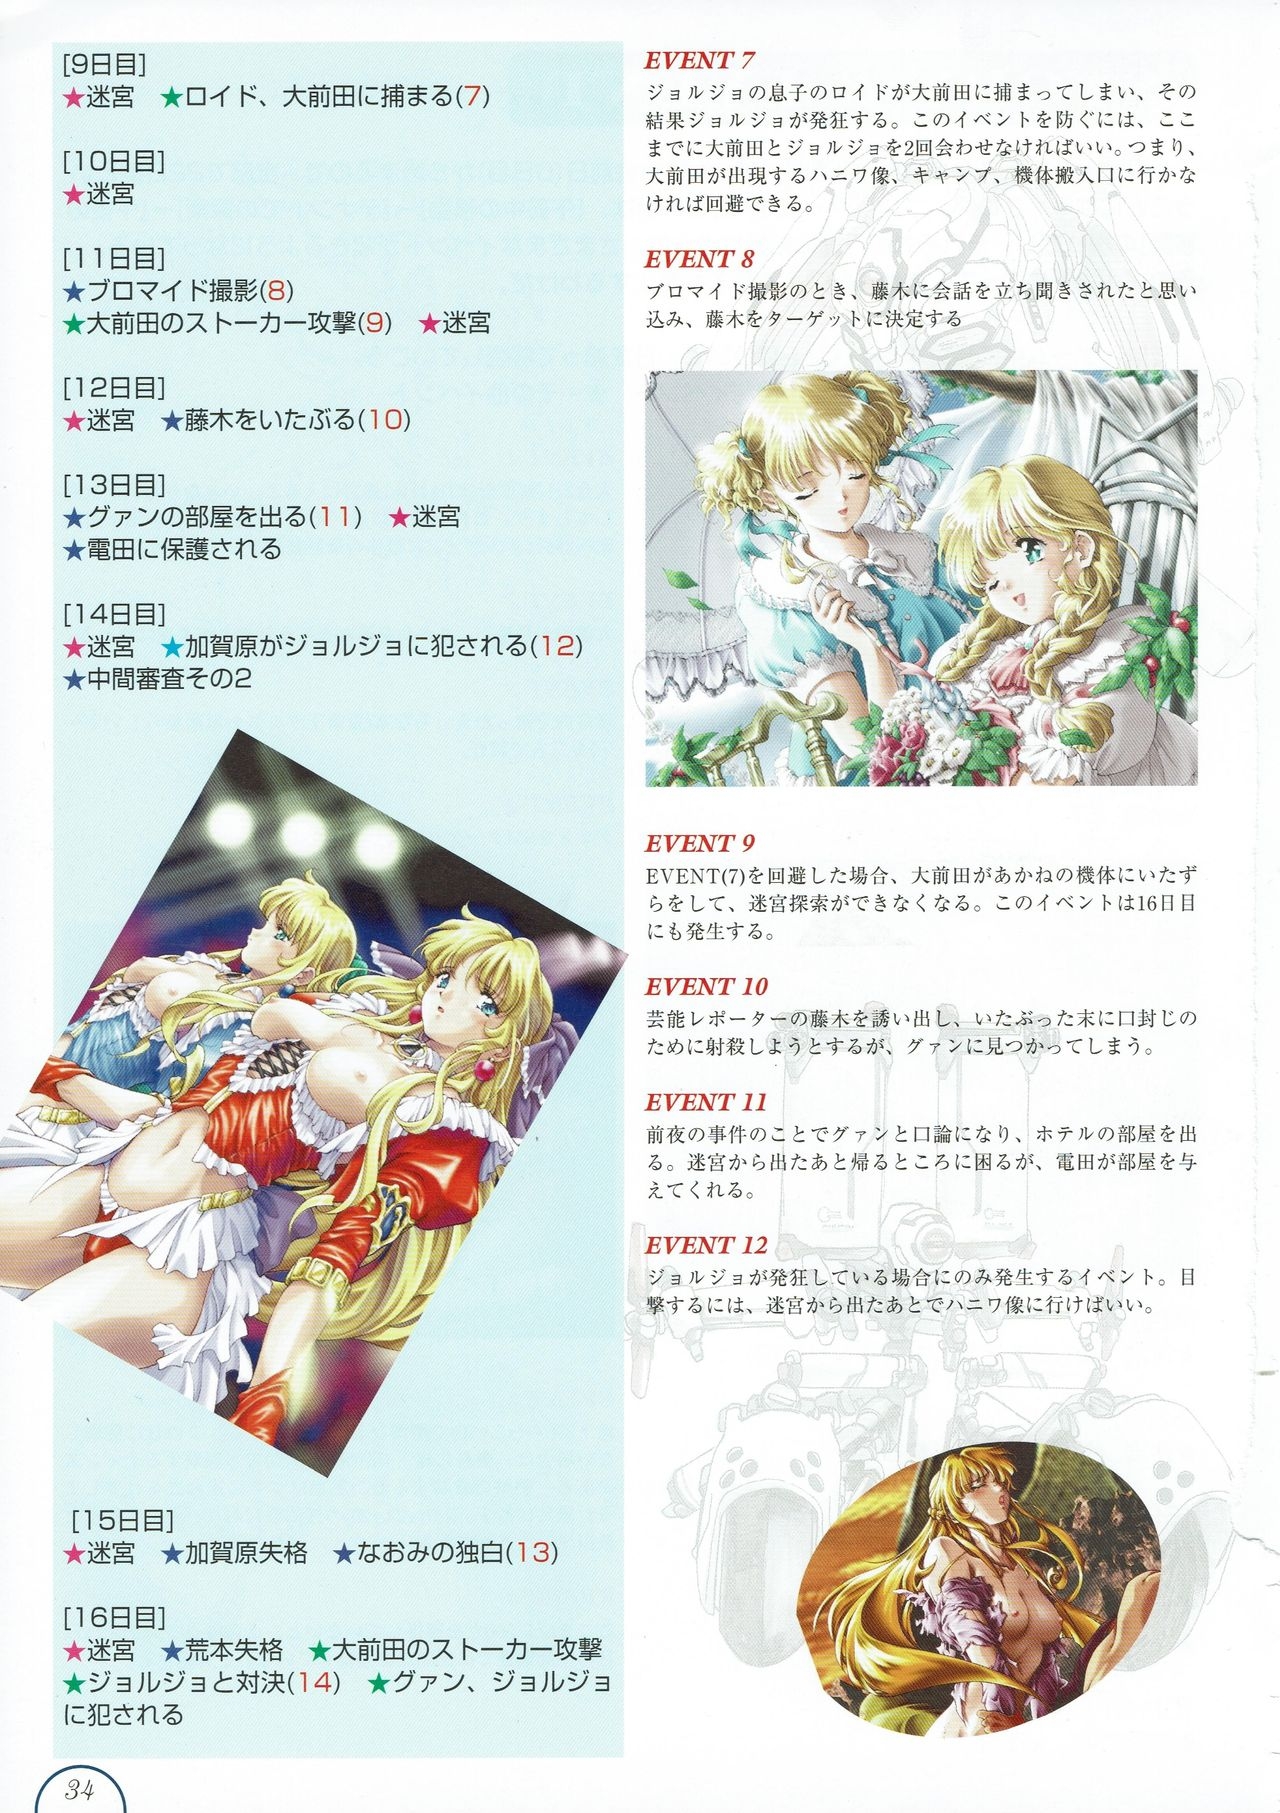 Alice no Yakata 456 Official Guide 35